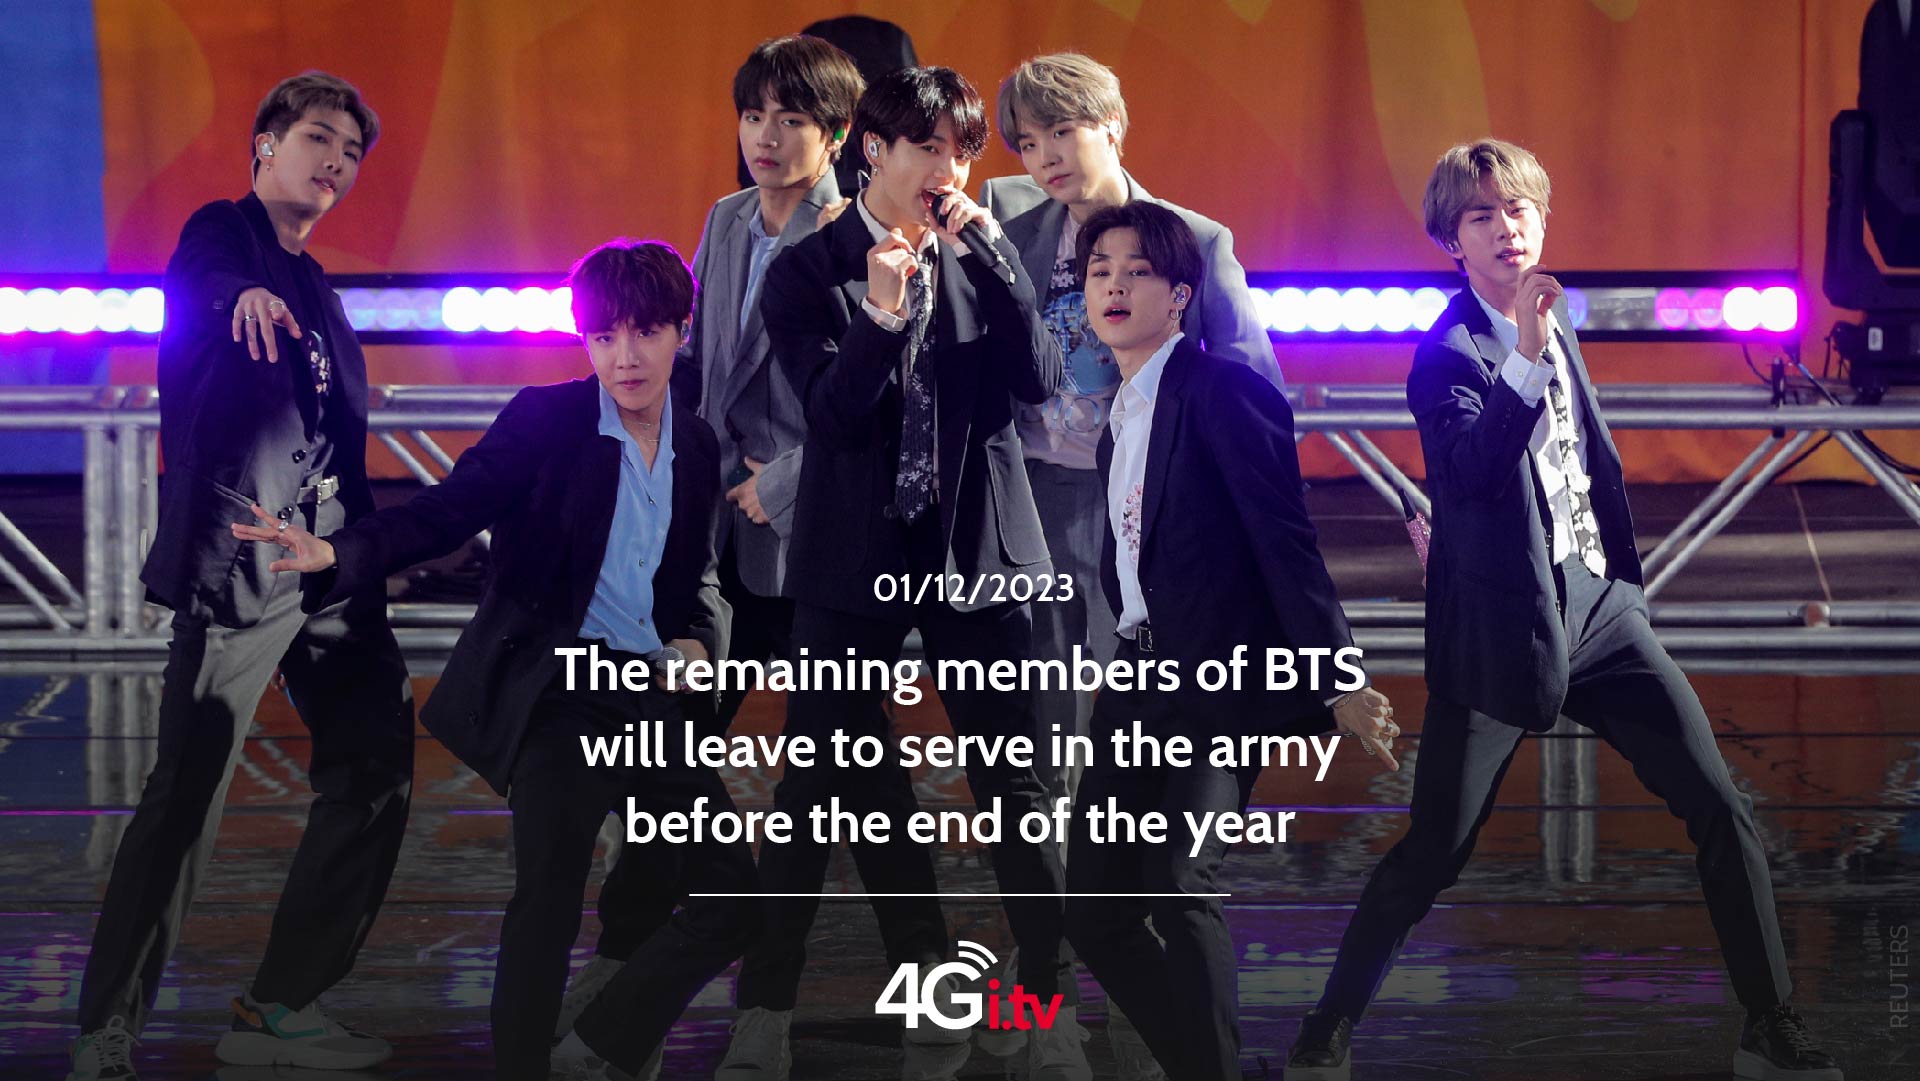 Lee más sobre el artículo The remaining members of BTS will leave to serve in the army before the end of the year